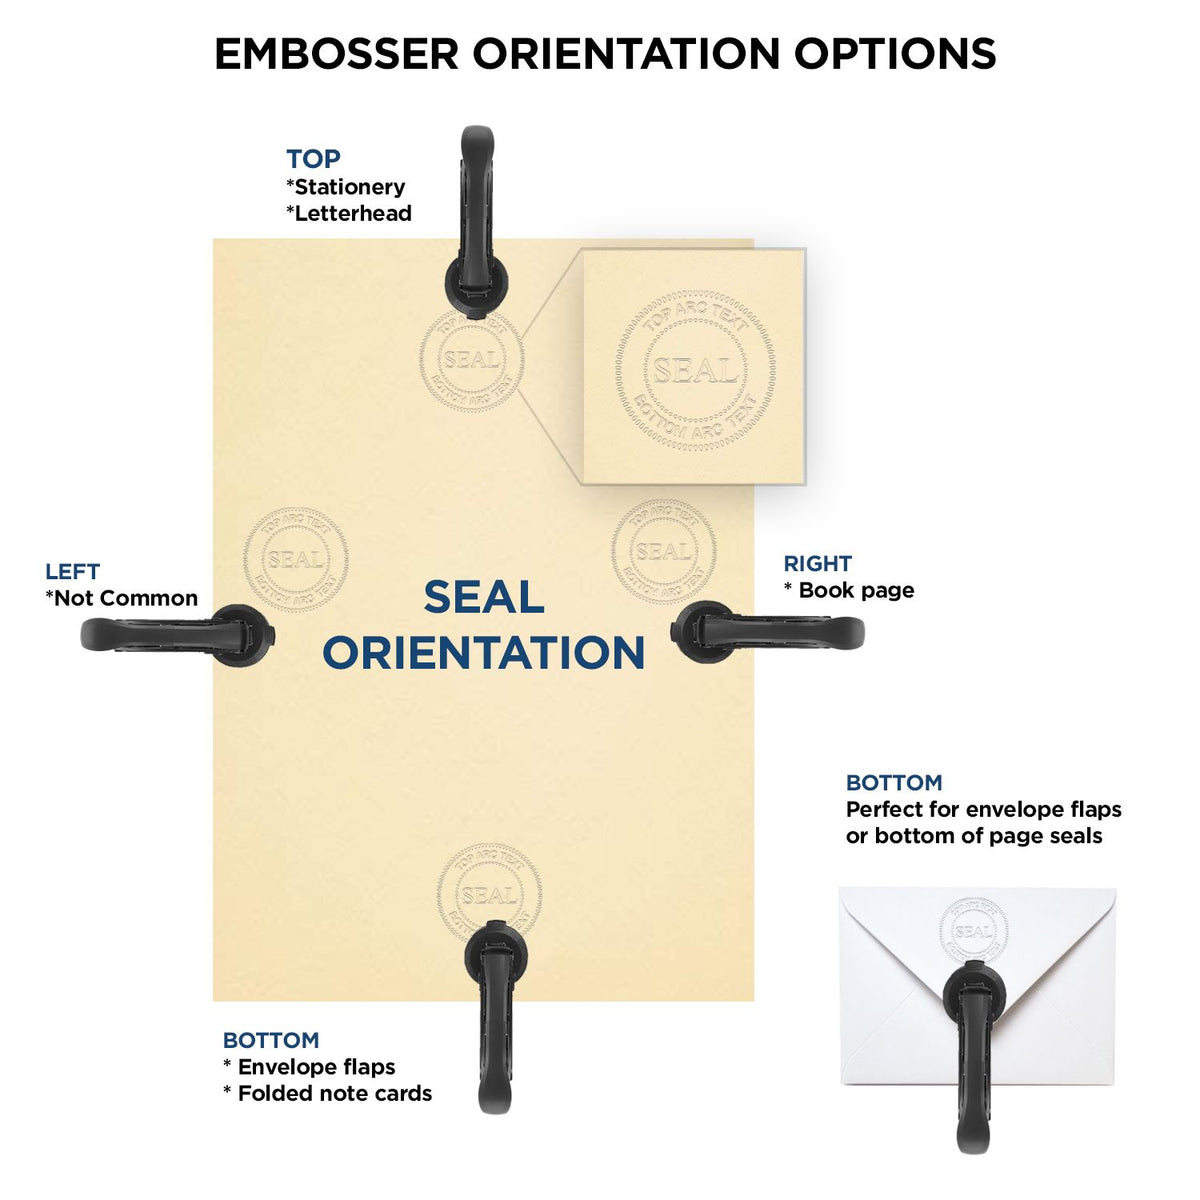 An infographic for the Soft Pocket Kentucky Landscape Architect Embosser showing embosser orientation, this is showing examples of a top, bottom, right and left insert.